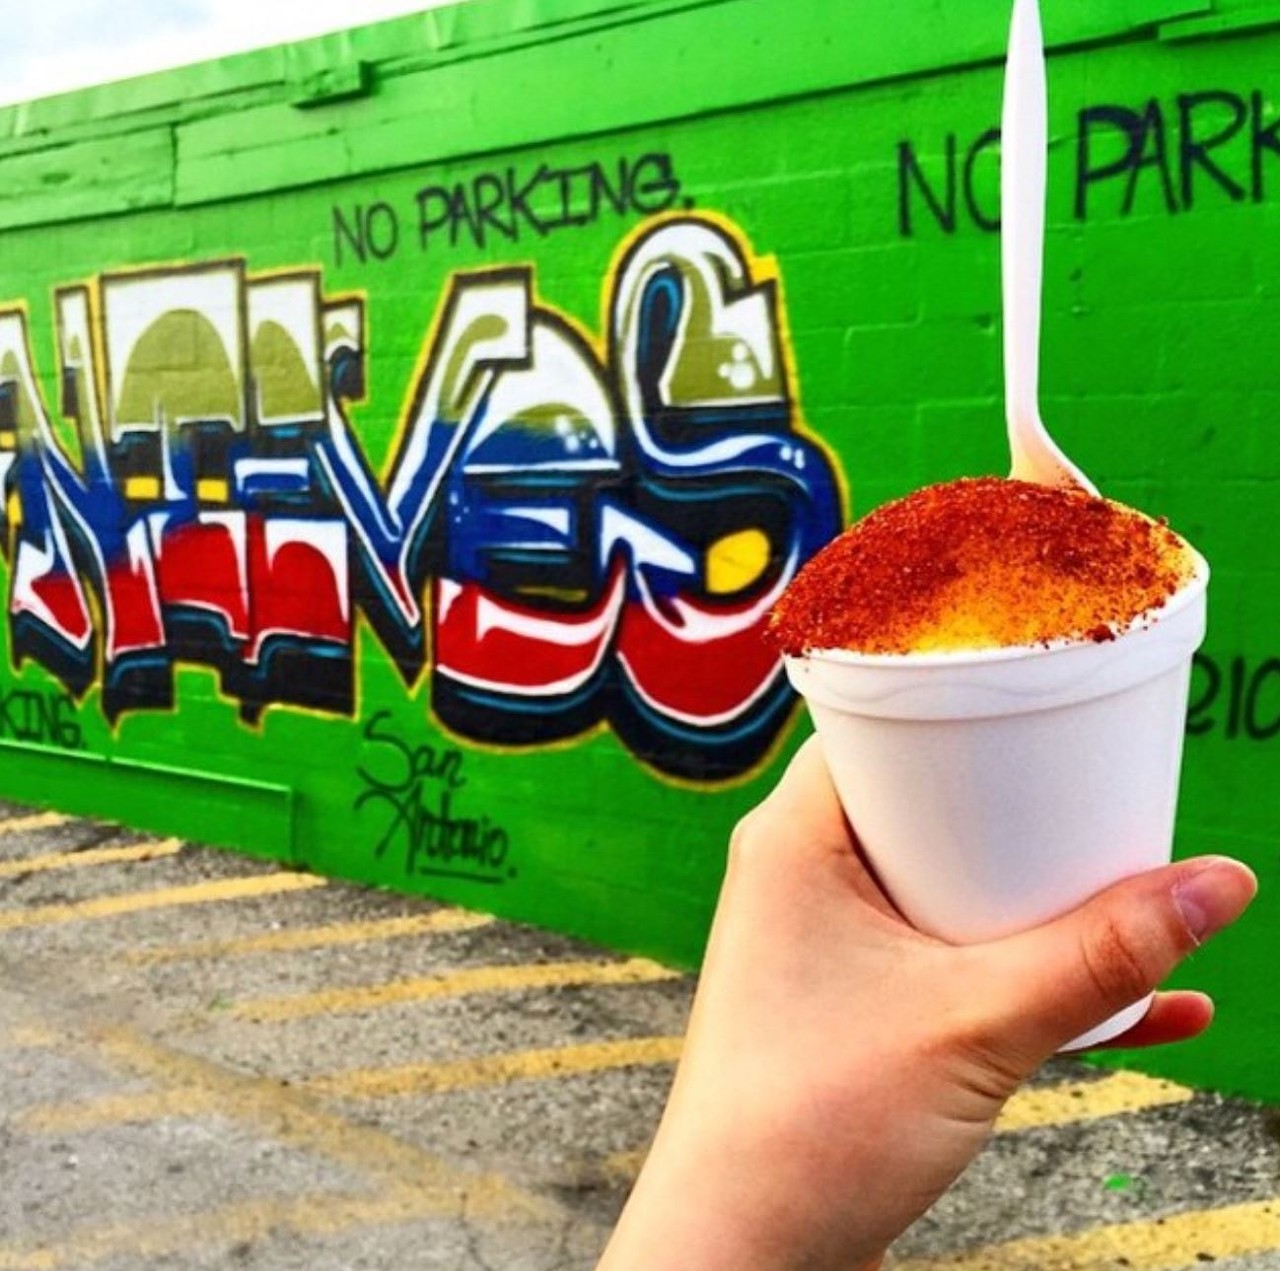 Snack on raspas (and all your favorite puro snacks) at Las Nieves
Multiple locations, lasnievesfruitcups.com
It doesn’t get more puro than kissing your date even if they’ve got Frito breath.
Photo via Instagram / eat_intheheartoftexas